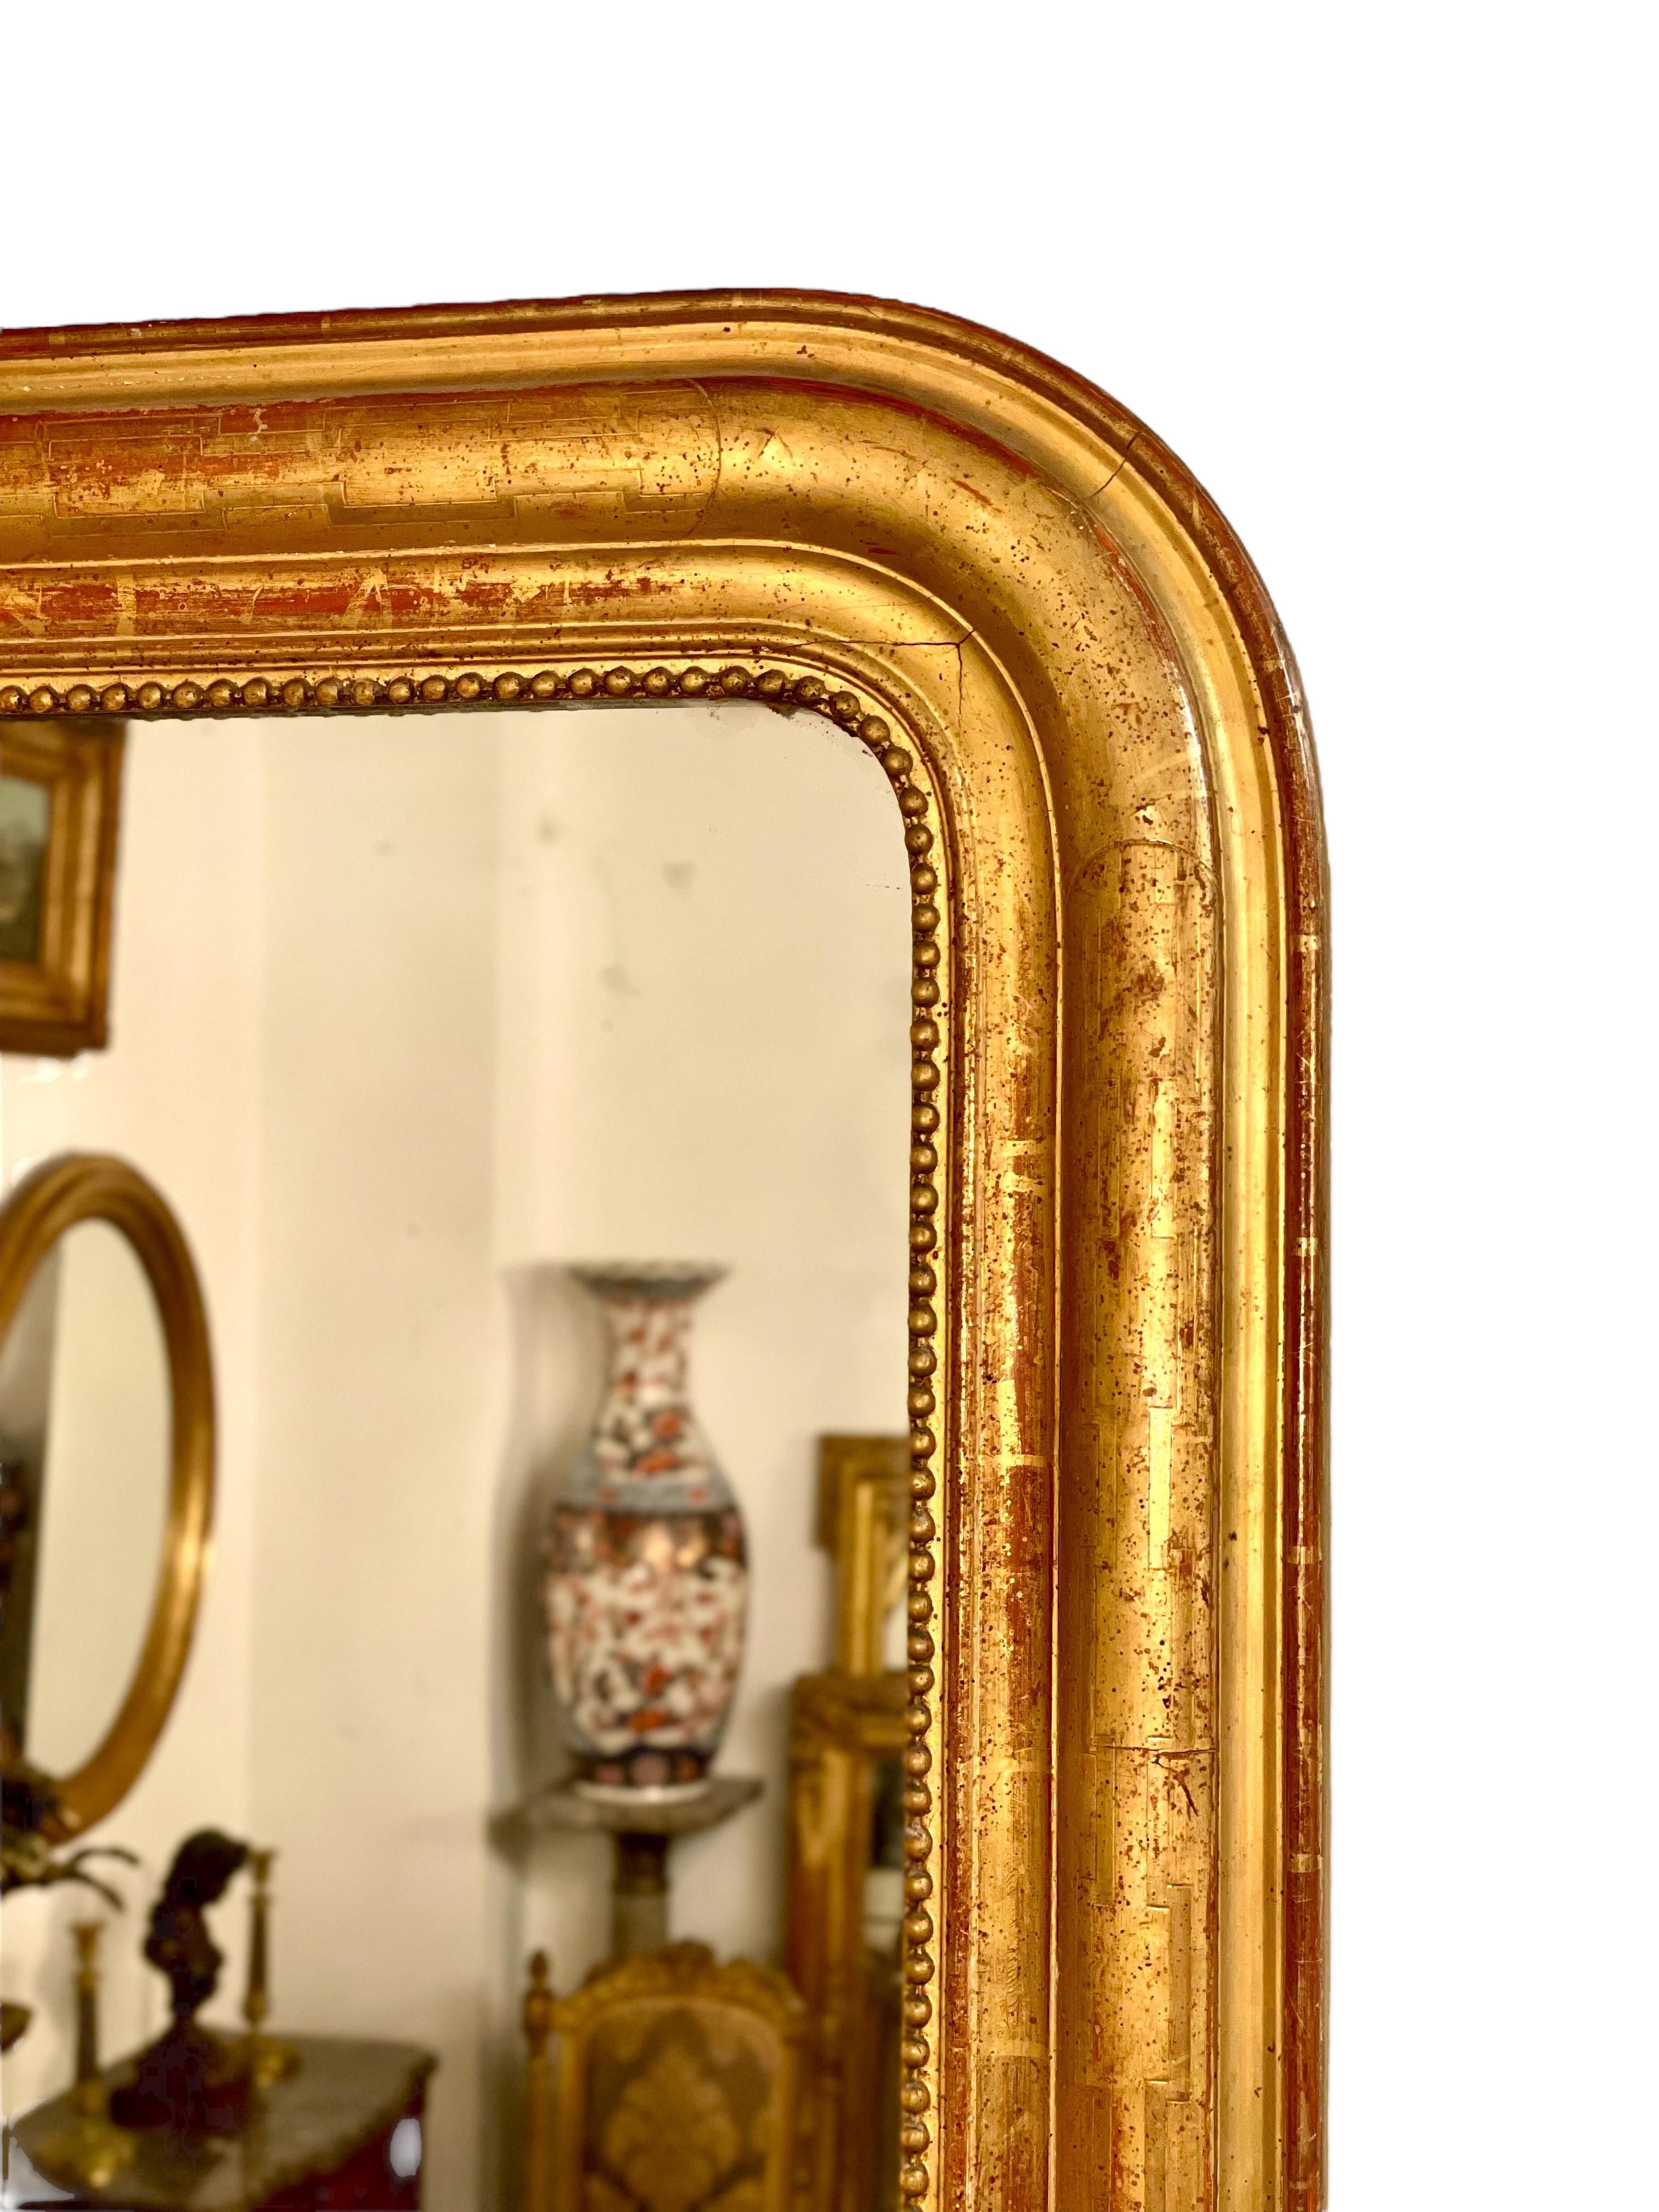 A handsome large Louis Philippe gilt wall mirror featuring the curved upper corners typical of the period, and a lovely moulded surround with an etched geometric design showing through burnished gold-leaf. A delicate string-of-pearls motif encircles